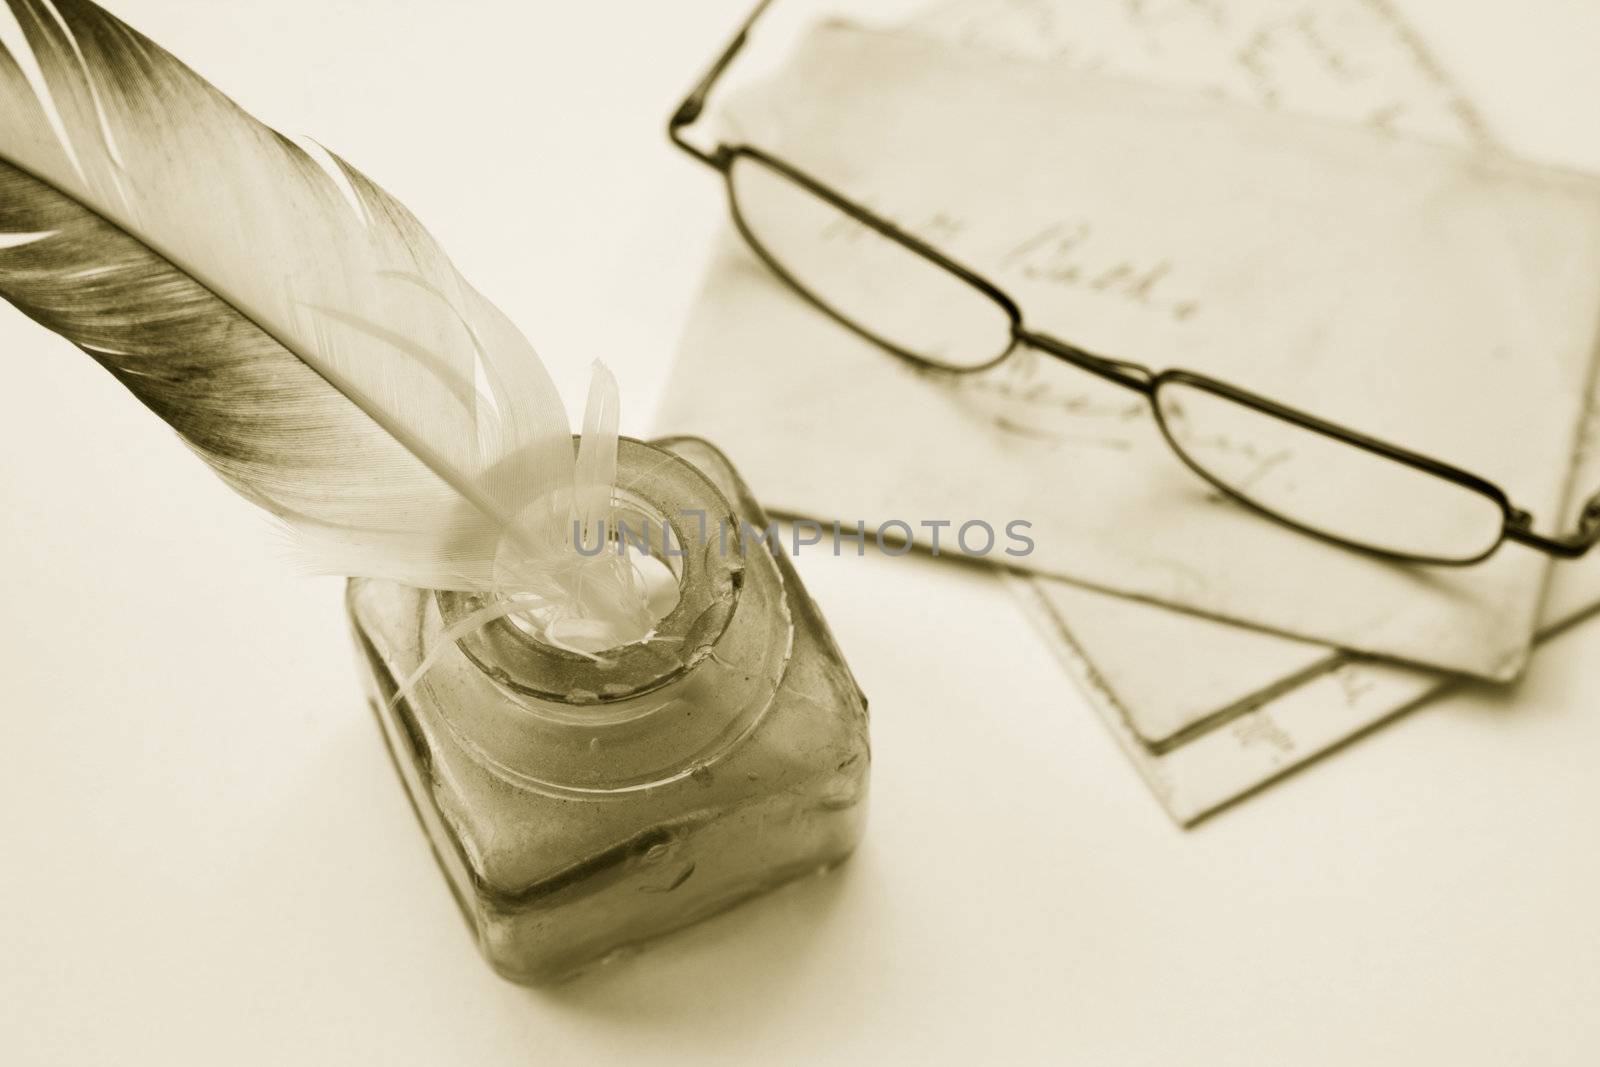 Sepia toned image of an ink pot with feathered quill and hand written letters (recreated by self) and a pair of reading glasses.